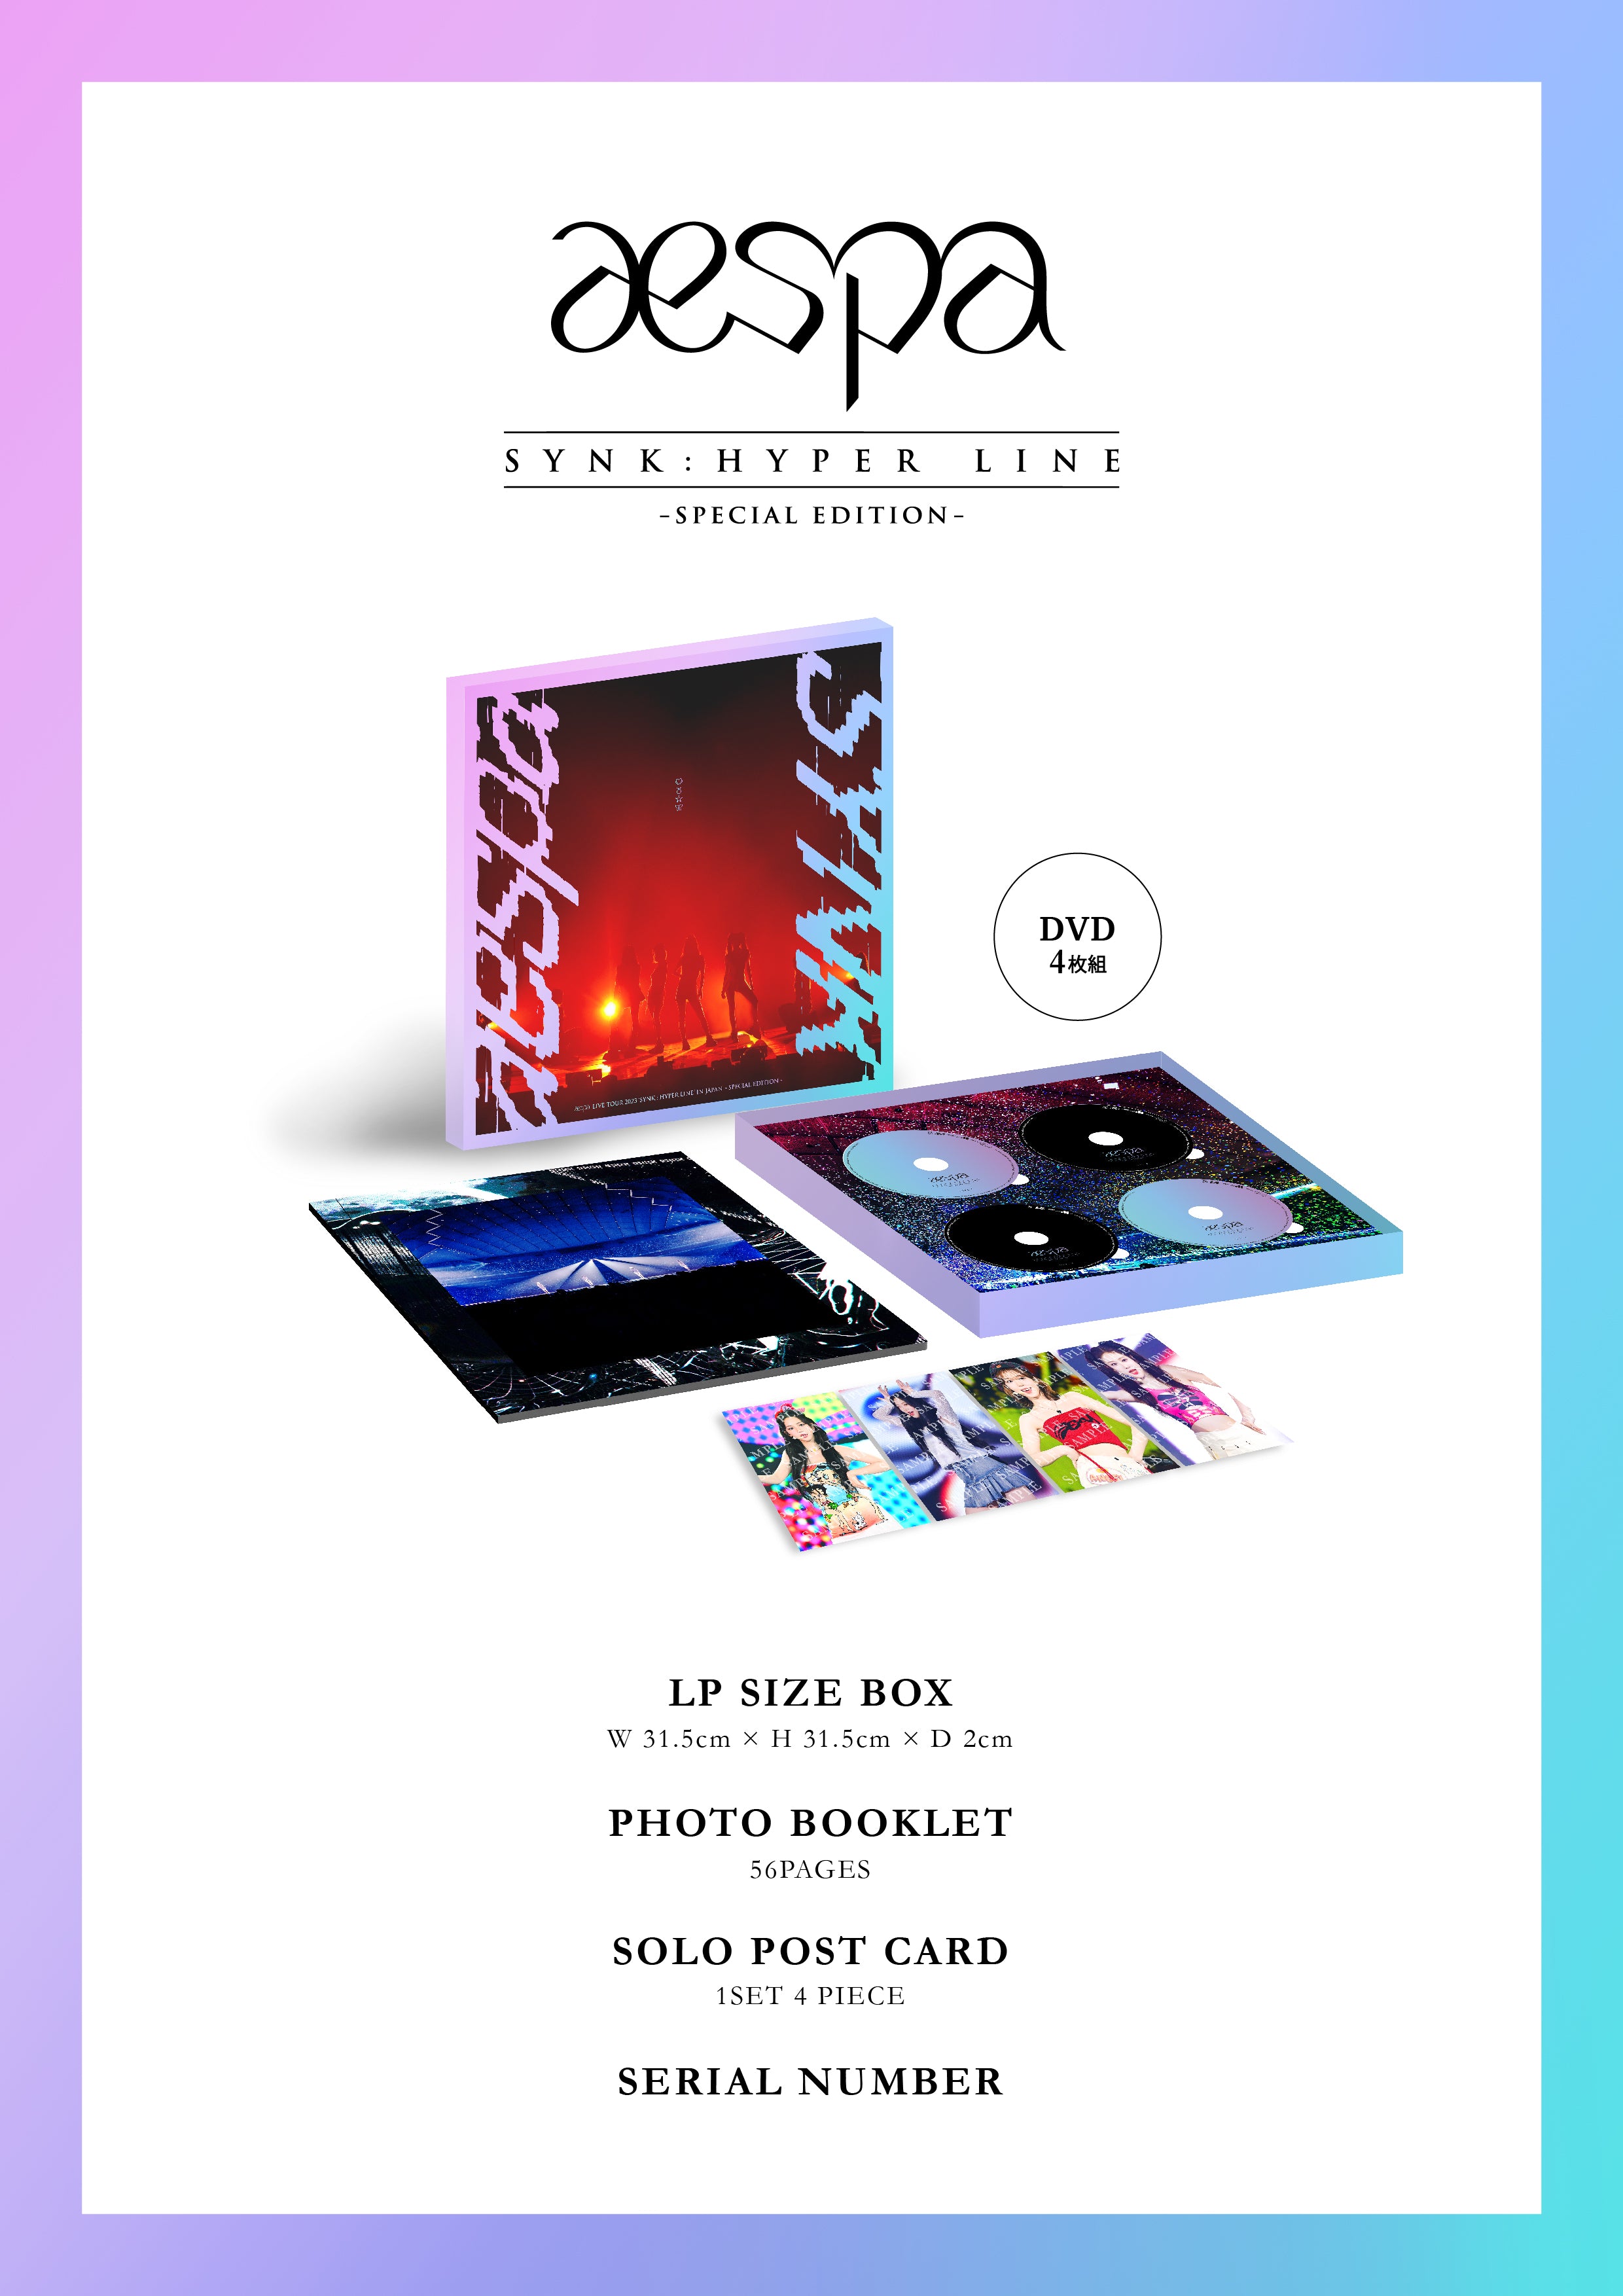 aespa LIVE TOUR 2023 'SYNK : HYPER LINE' in JAPAN -Special Edition ...